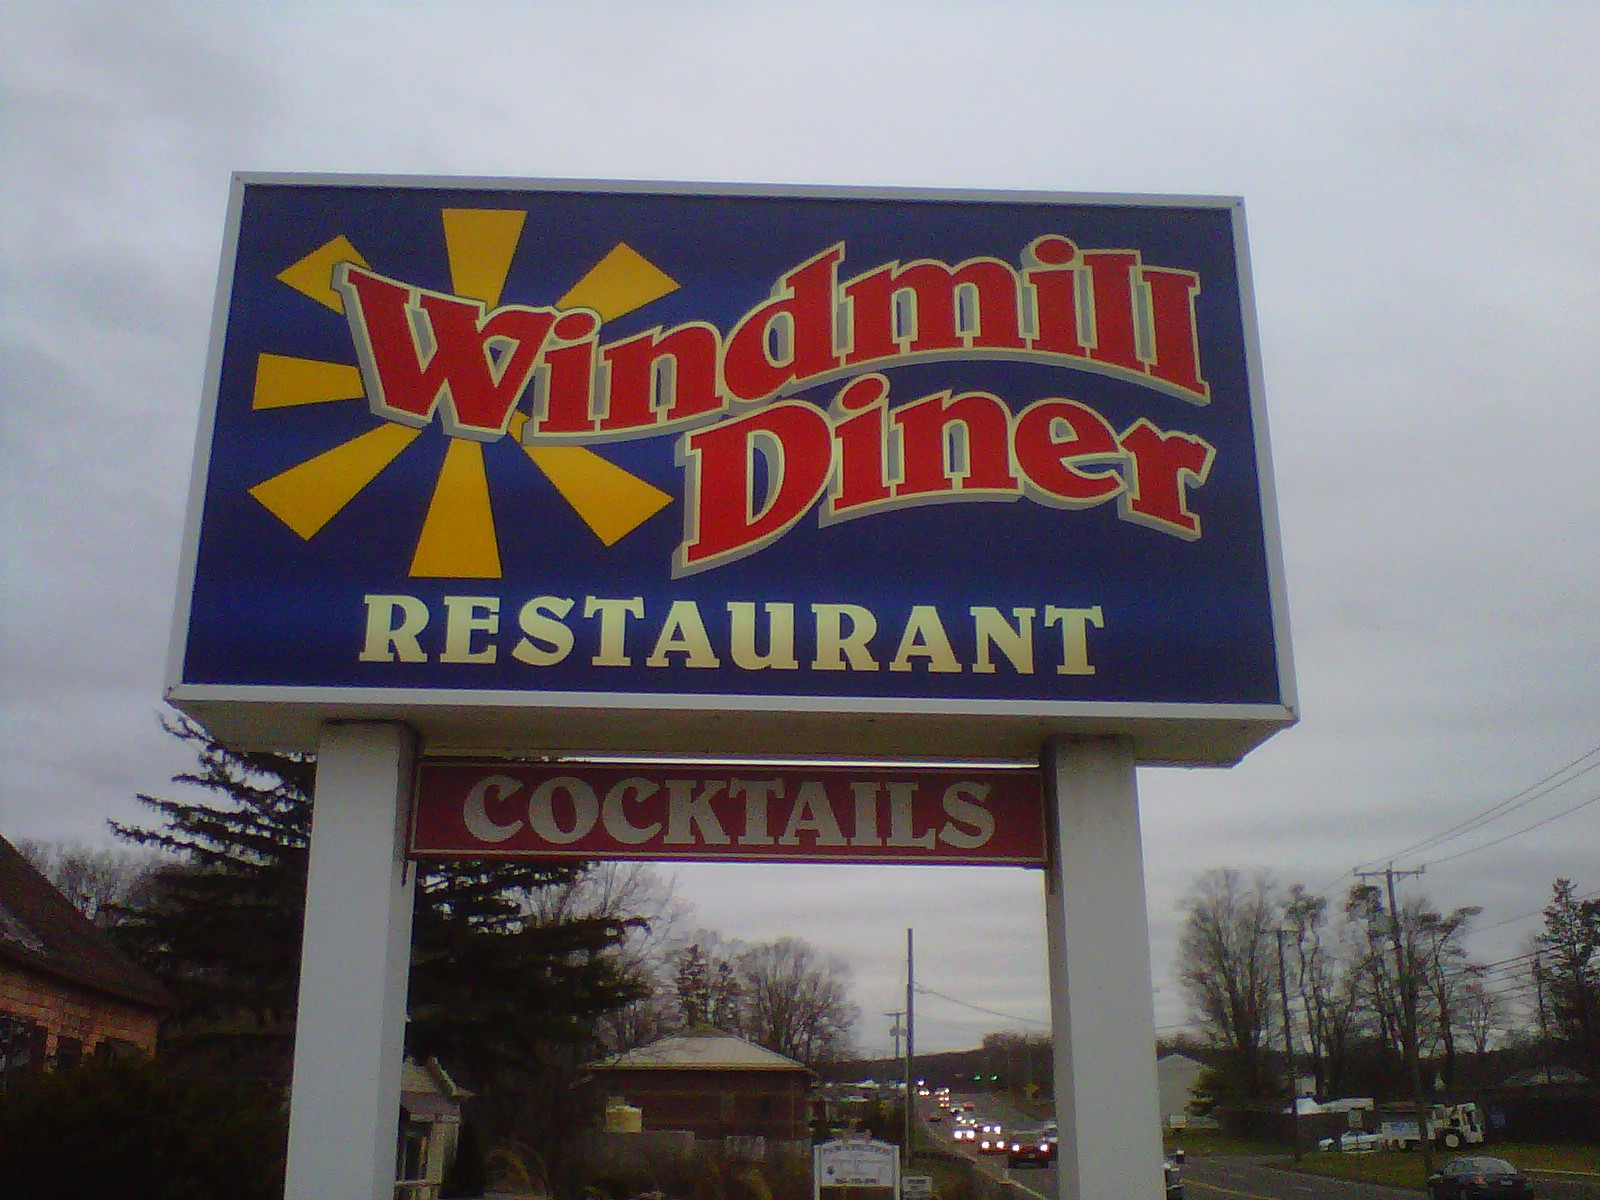 Windmill Diner - sign